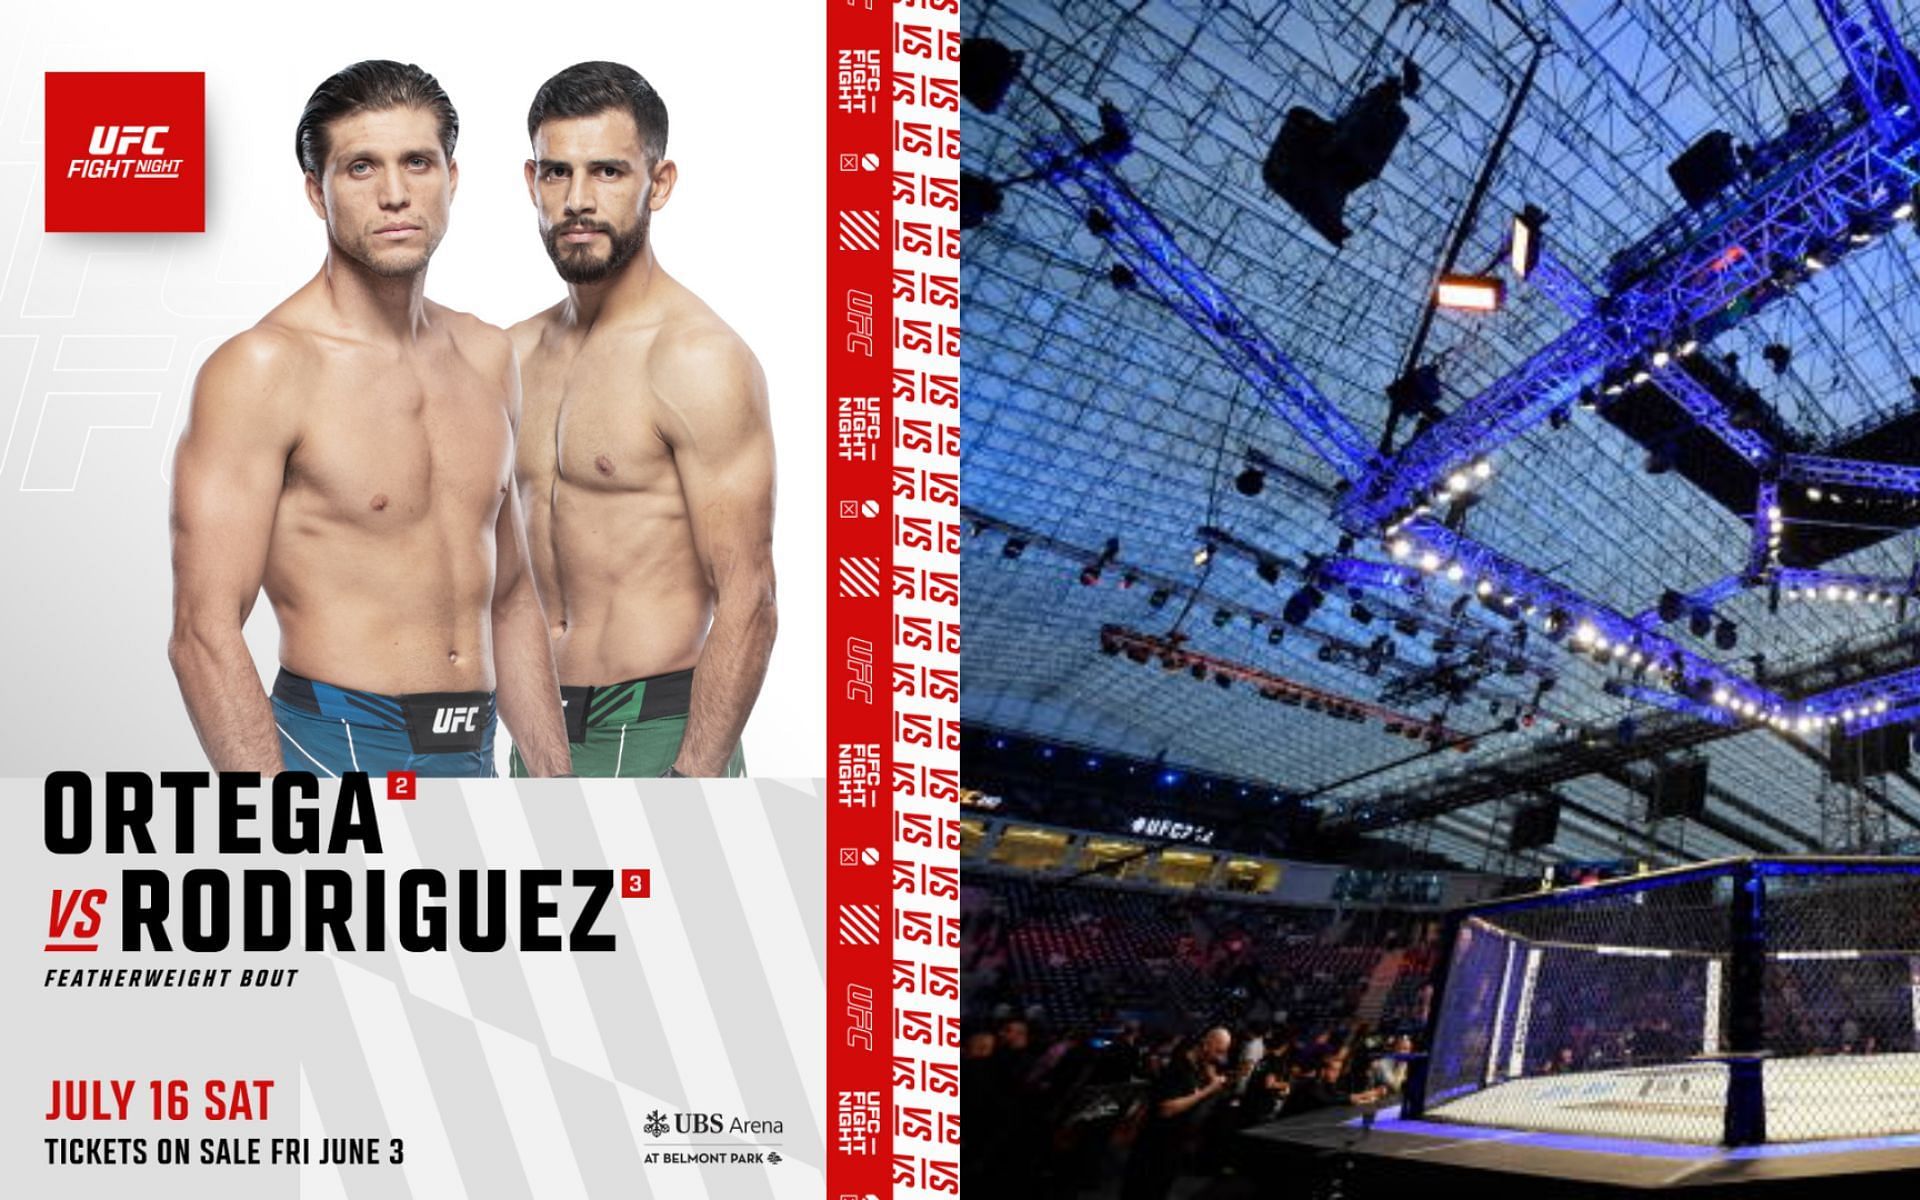 UFC Fight Night Ortega vs Rodriguez (image obtained via Getty images and twitter@UFC)